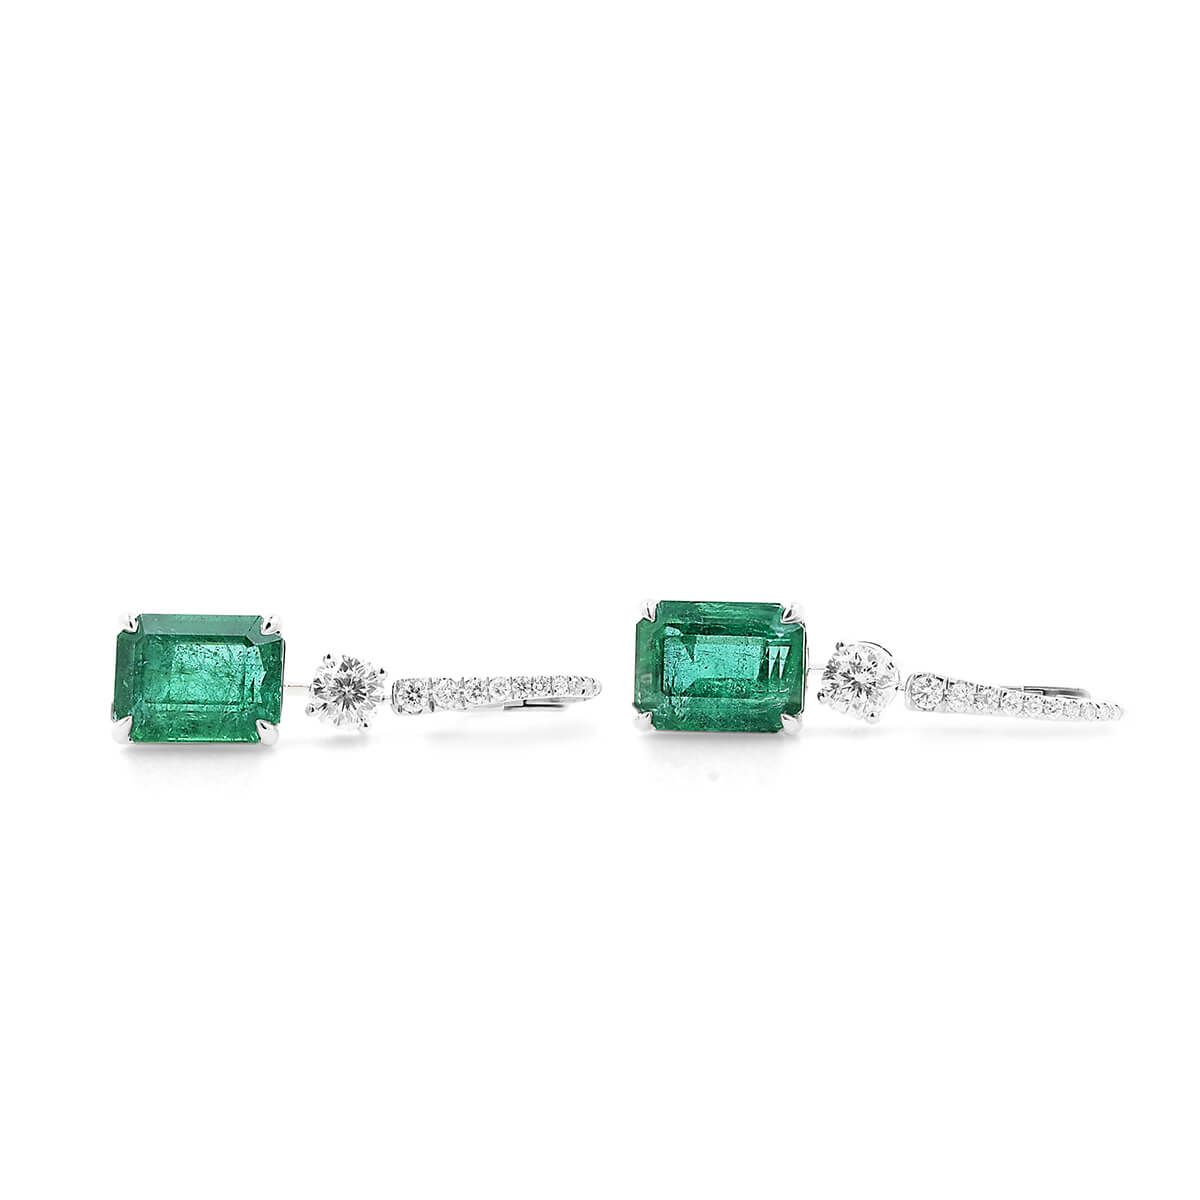 Natural Green Emerald Earrings, 12.91 Ct. (14.71 Ct. TW), GRS Certified, GRS2016-127022, Unheated